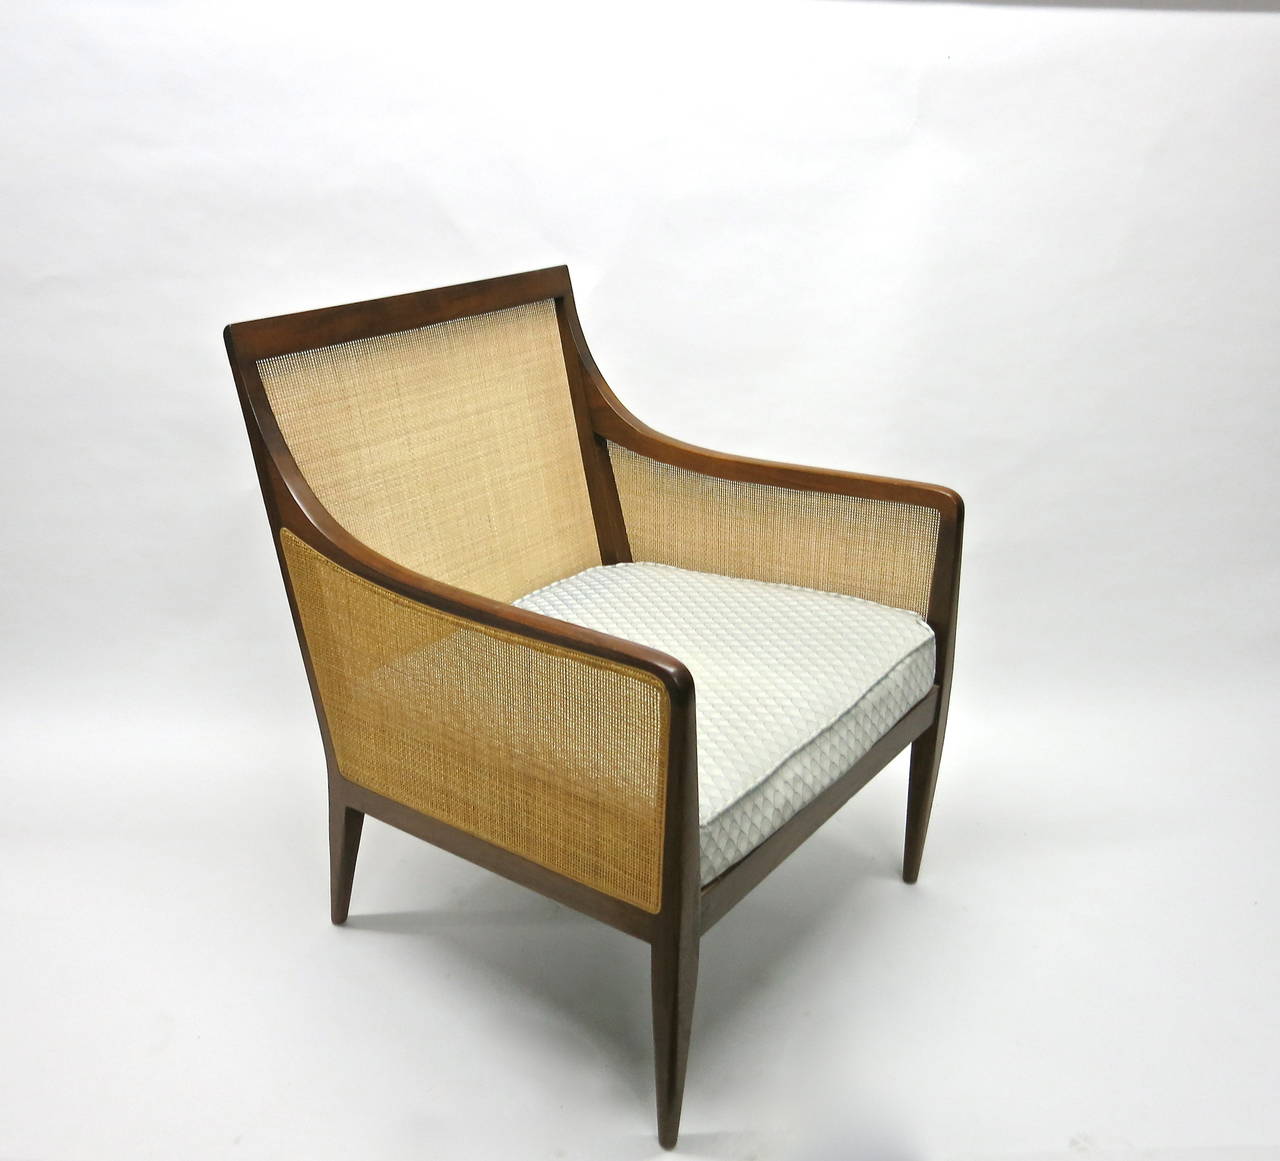 Chair in solid walnut with caned back and sides designed by Kipp Stewart for Directional. The caning and wood are all in excellent condition; the seat cushion is attached to the chair and the back cushion is loose for optional use. Both cushions are